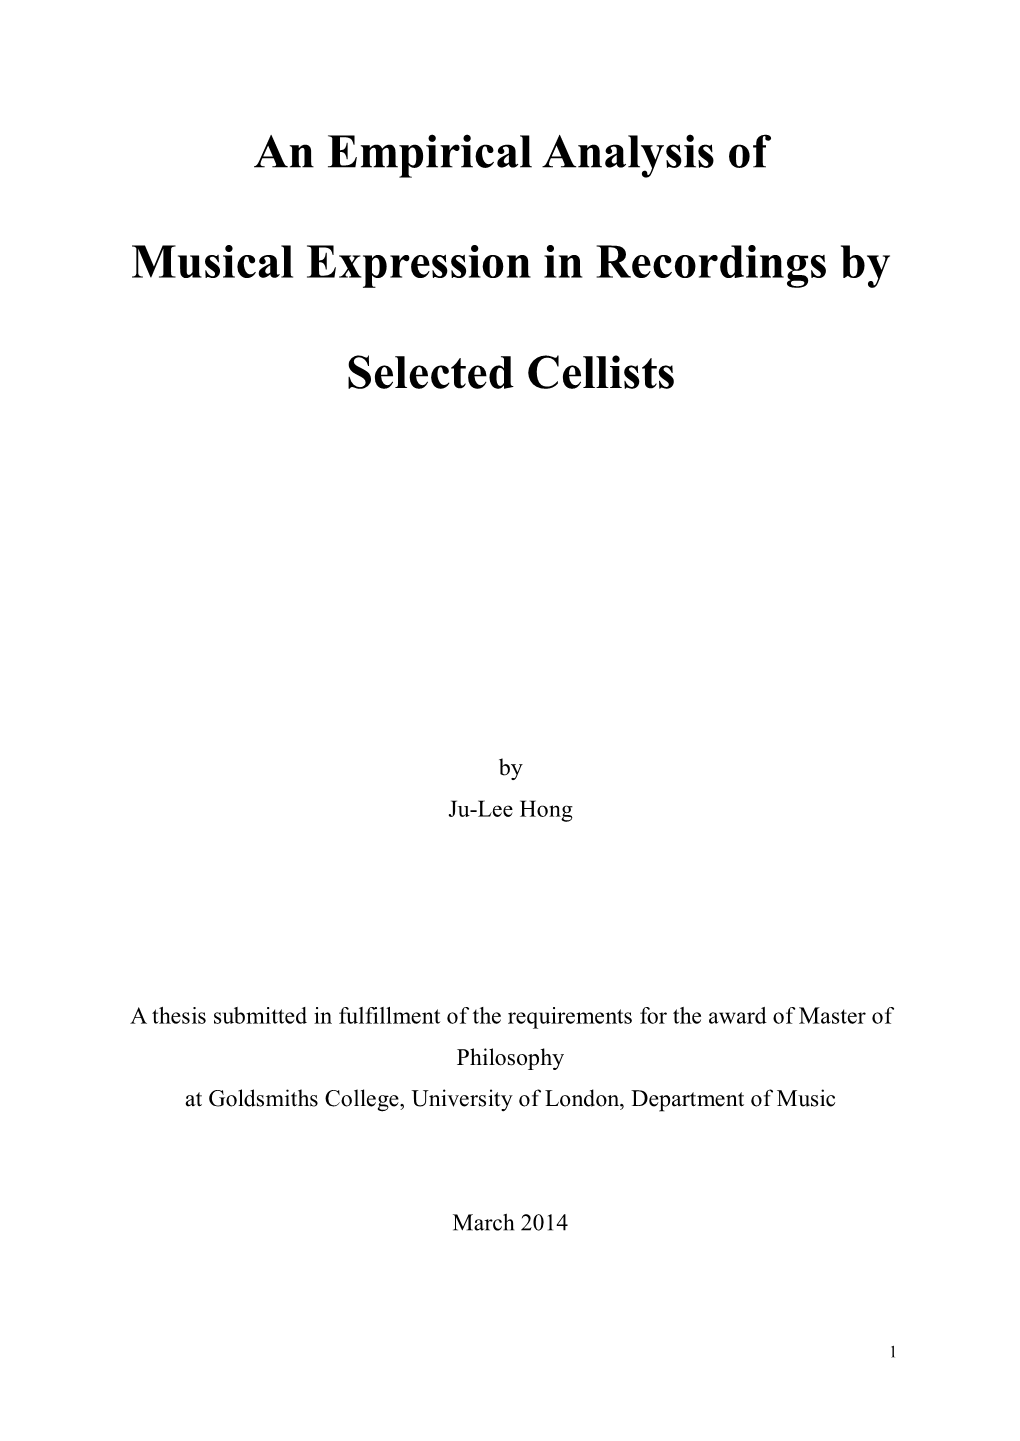 An Empirical Analysis of Musical Expression in Recordings By